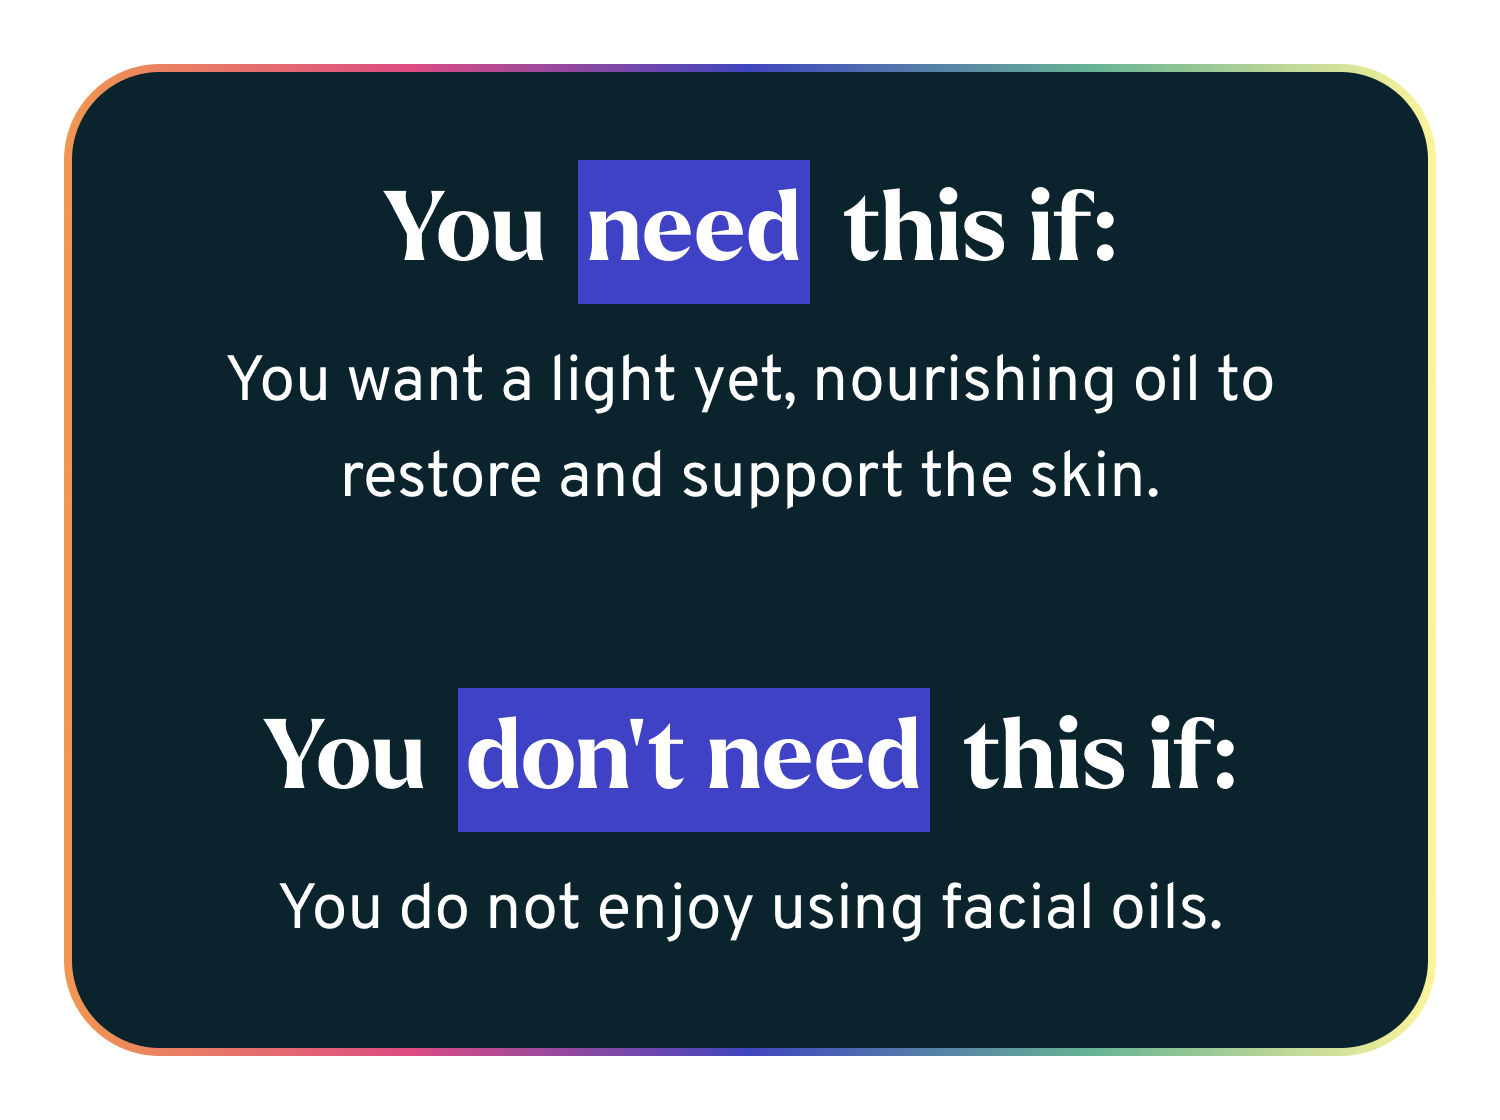 You need this if - You want a light yet, nourishing oil to restore and support the skin.   You don’t need this if: You do not enjoy using facial oils.